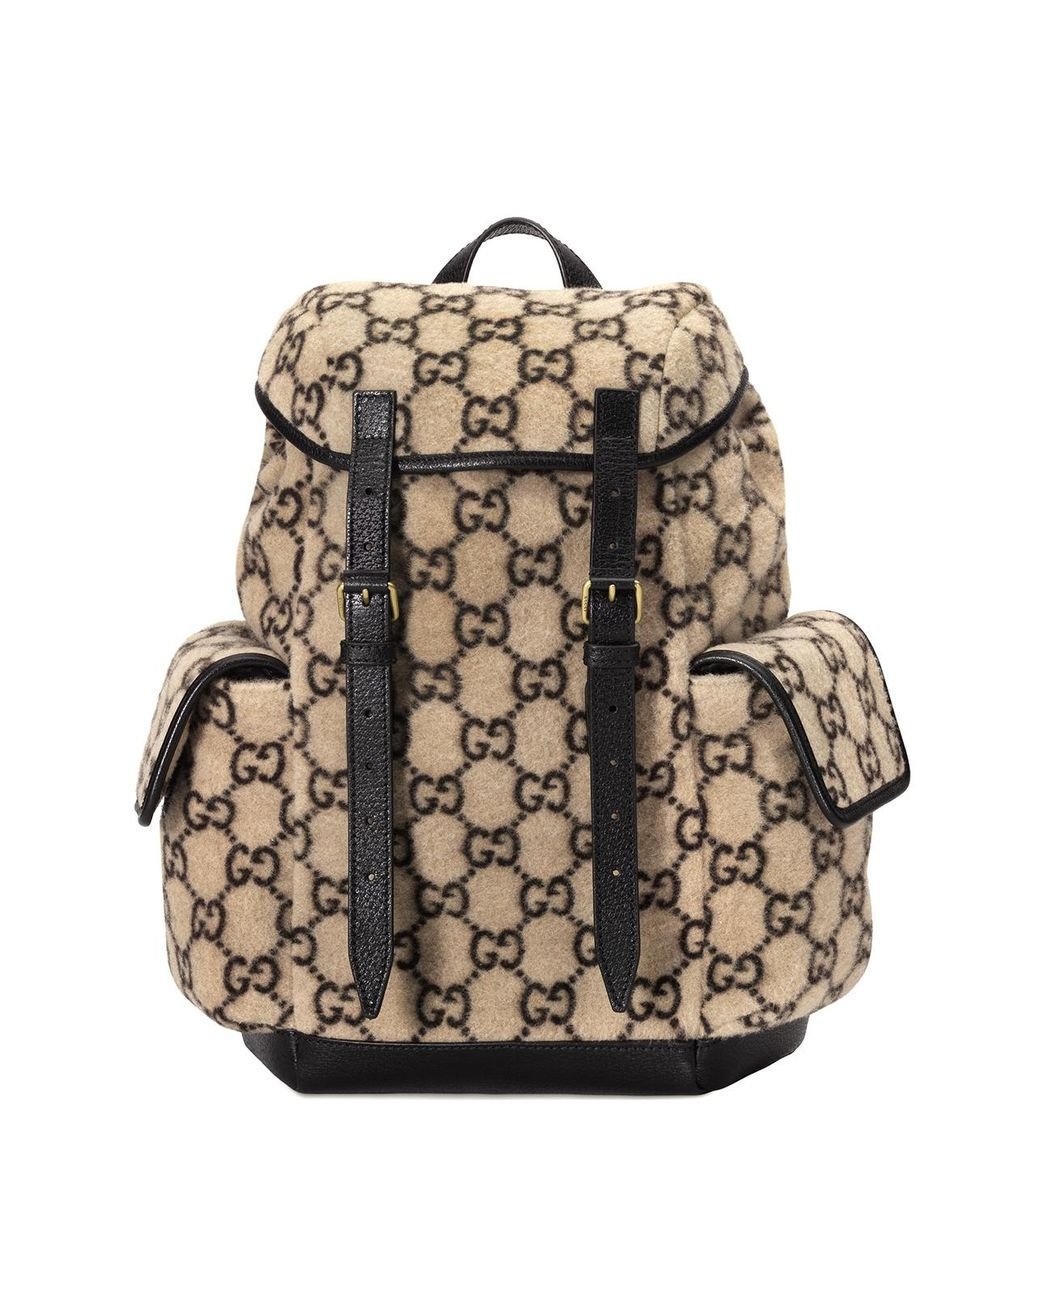 Gucci GG Wool Backpack in Beige (Natural) - Lyst